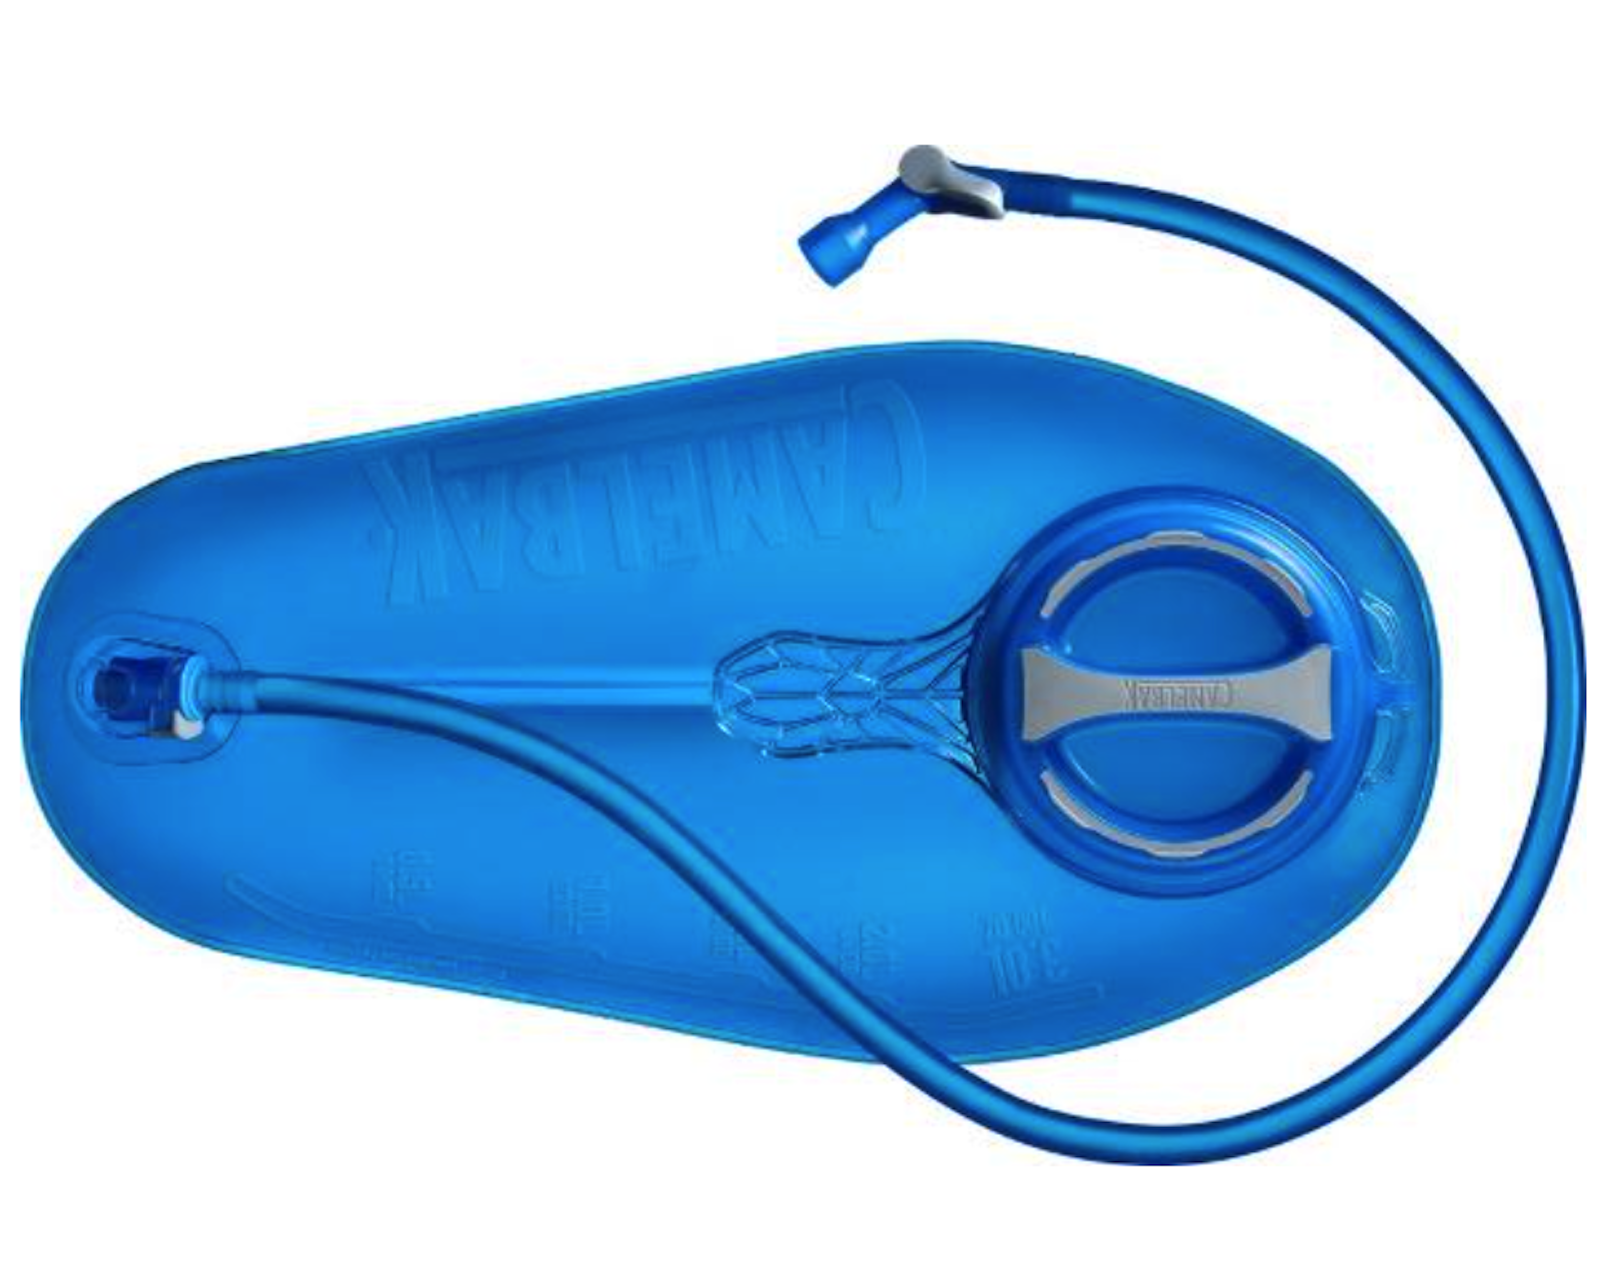 Camelbak hydration system for backpacking and trekking